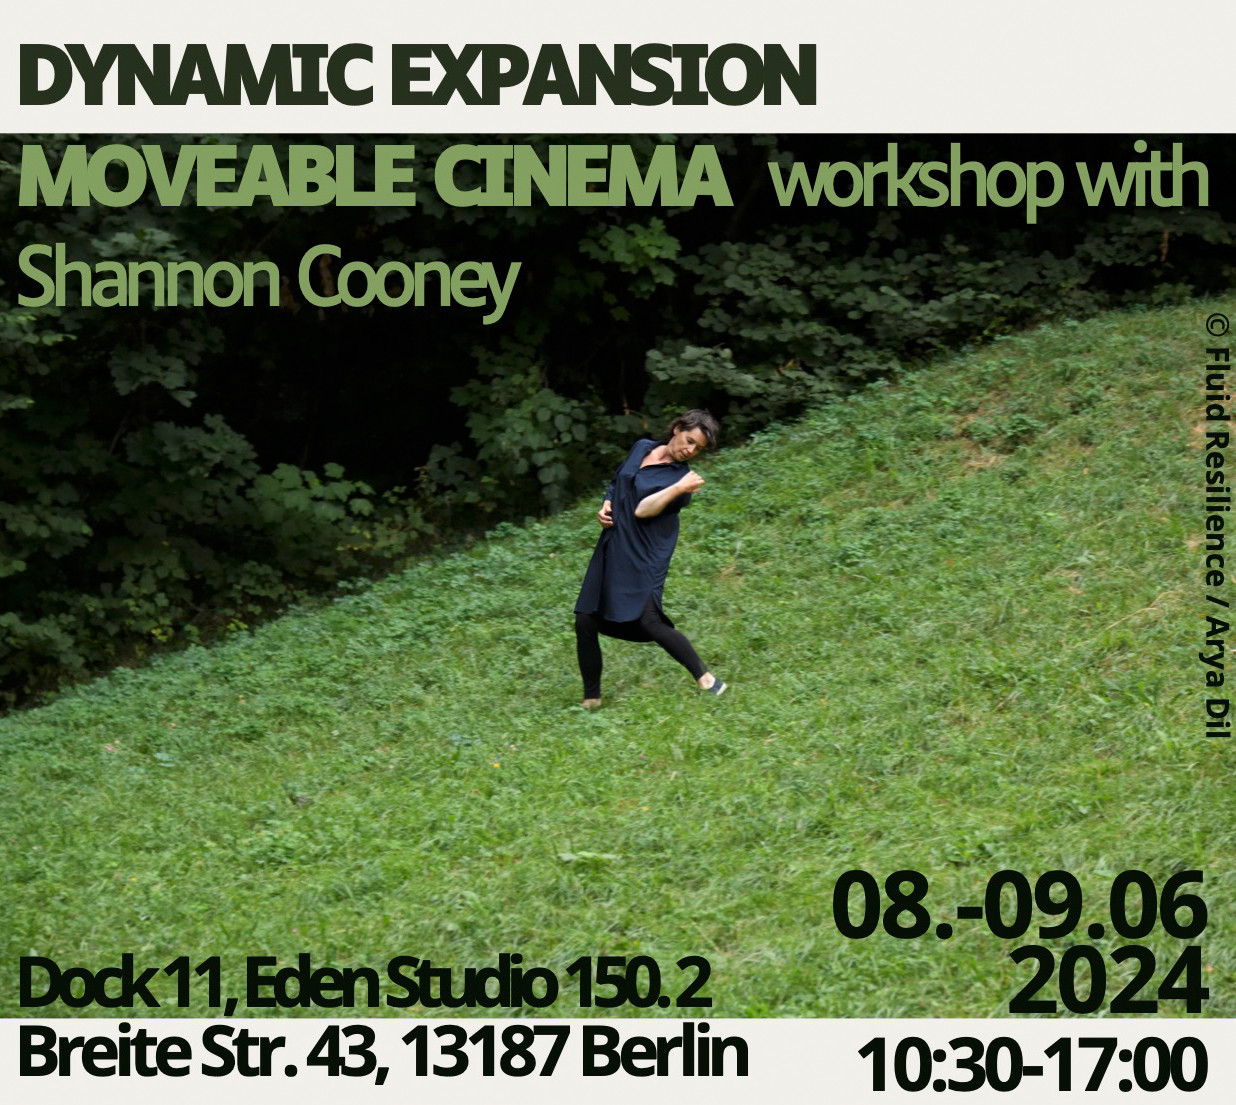 DYNAMIC EXPANSION MOVEABLE CINEMA